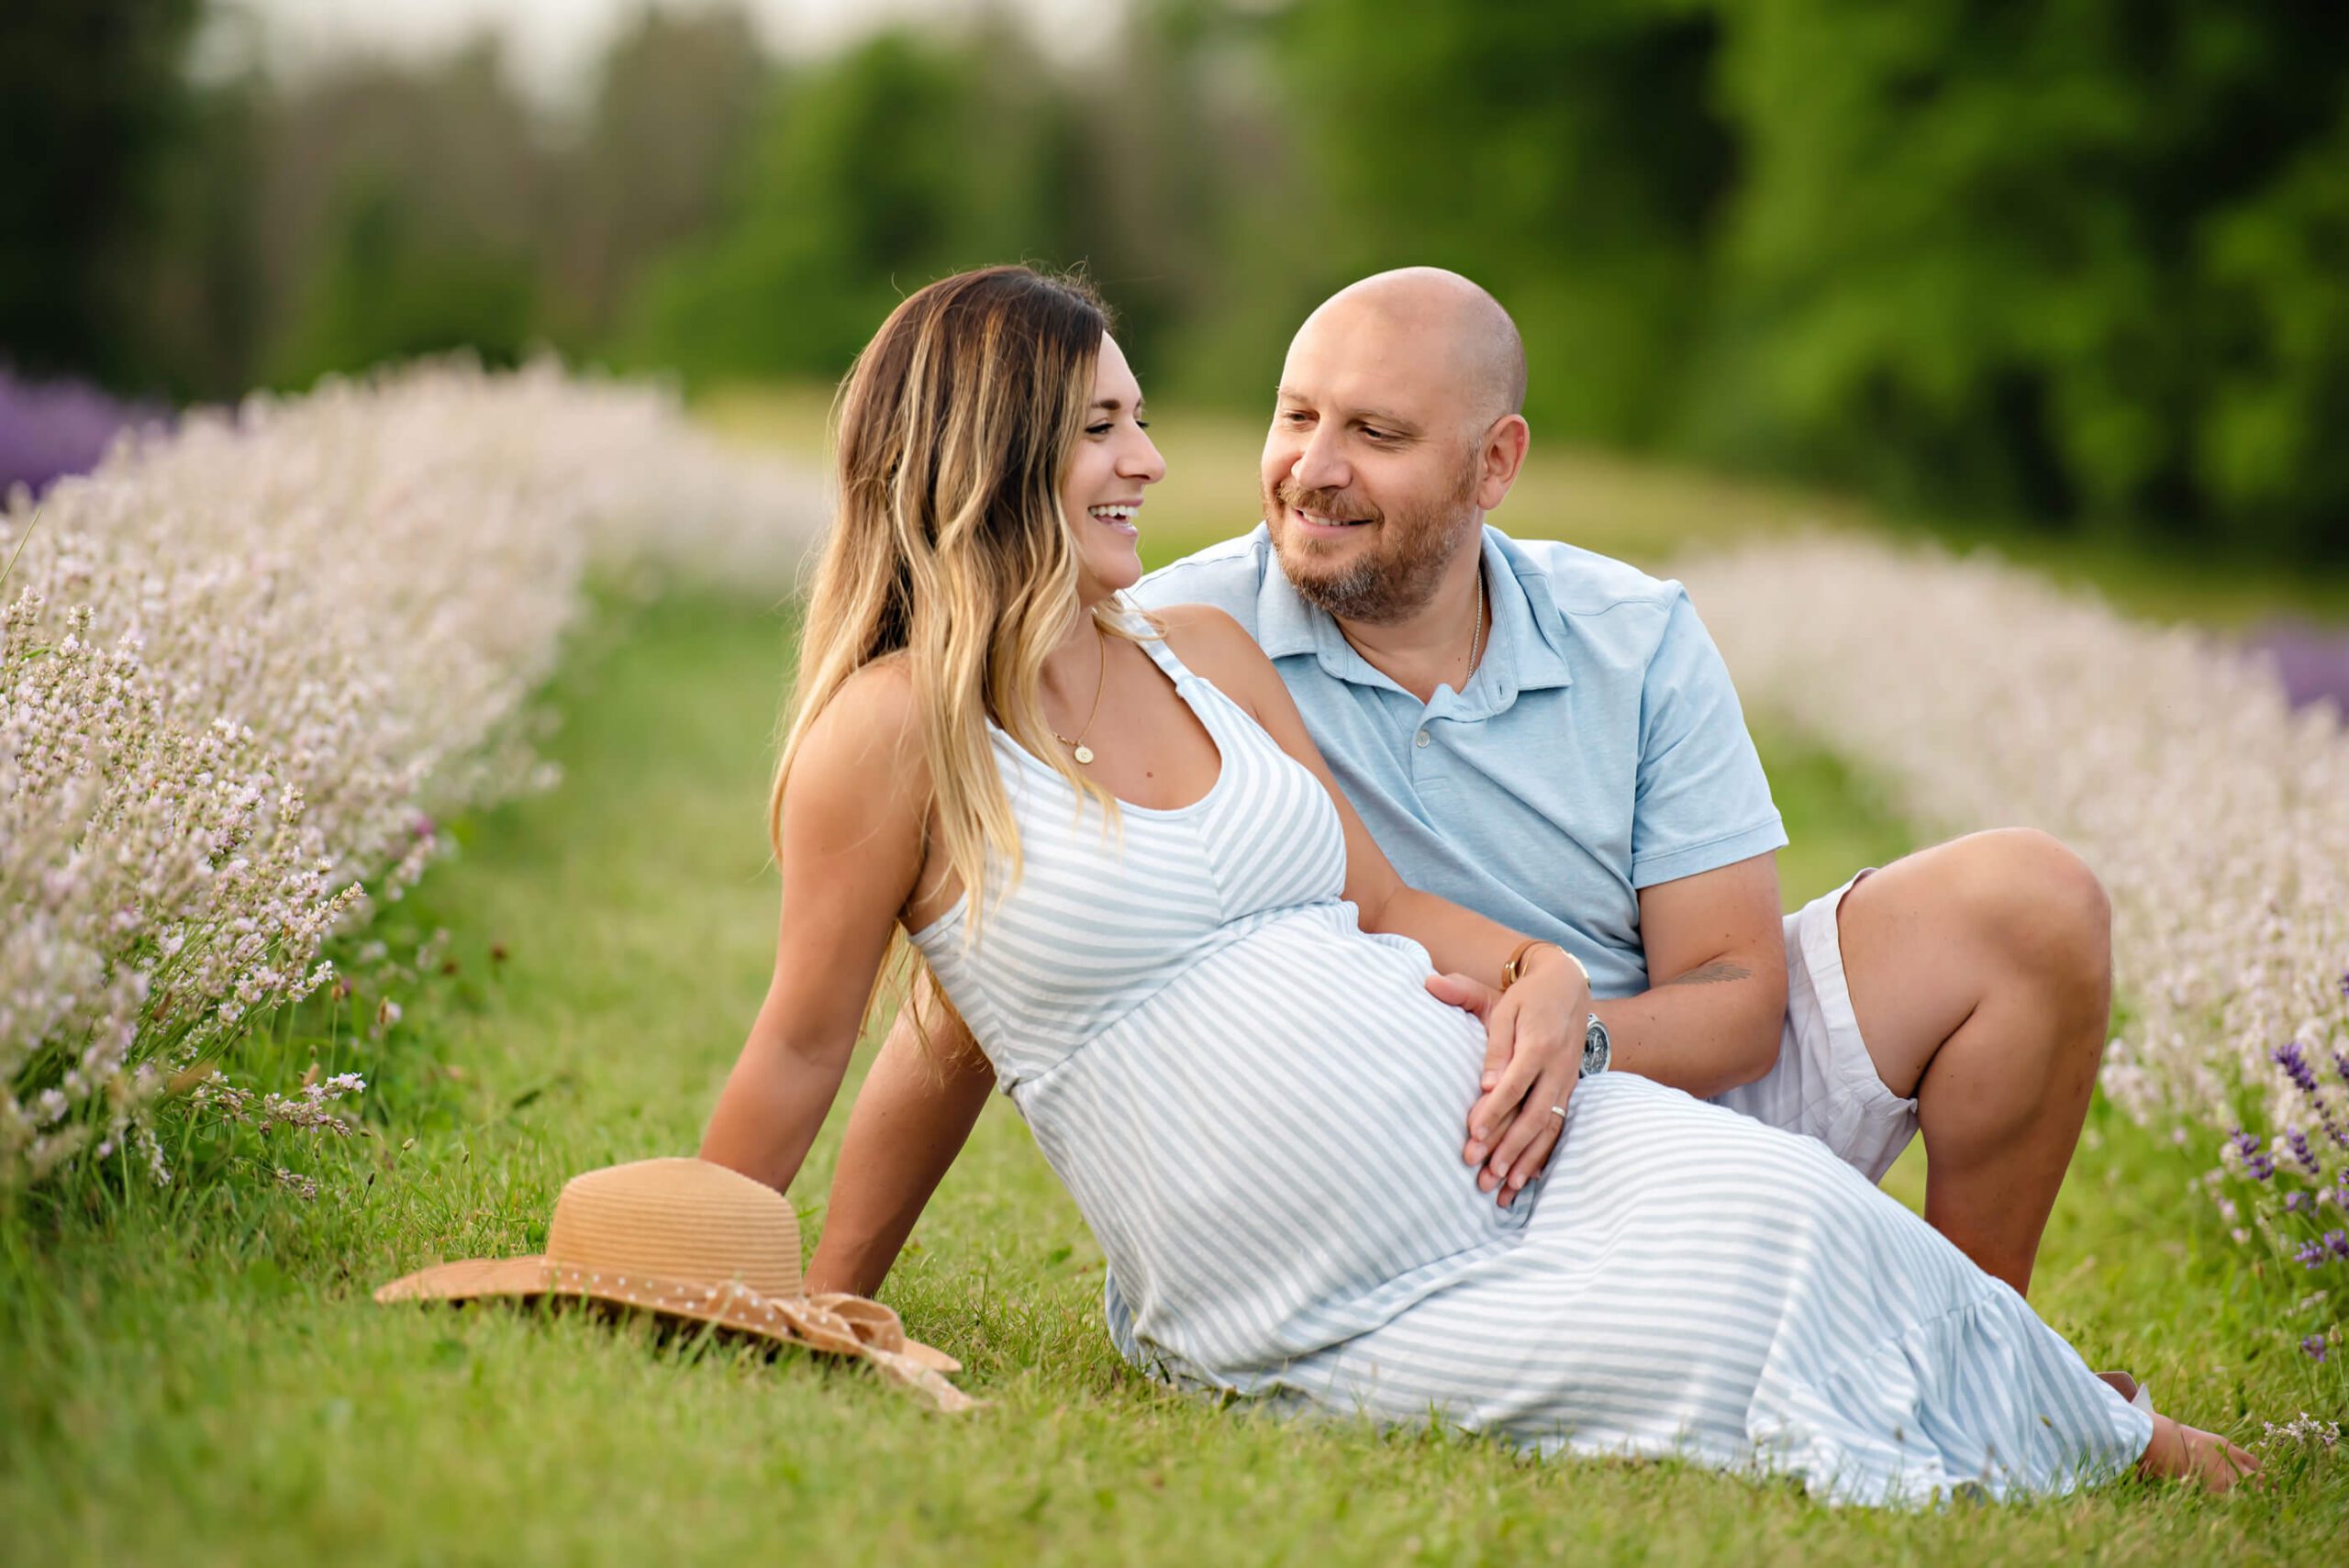 husband and wife in the lavender field for their maternity photography session